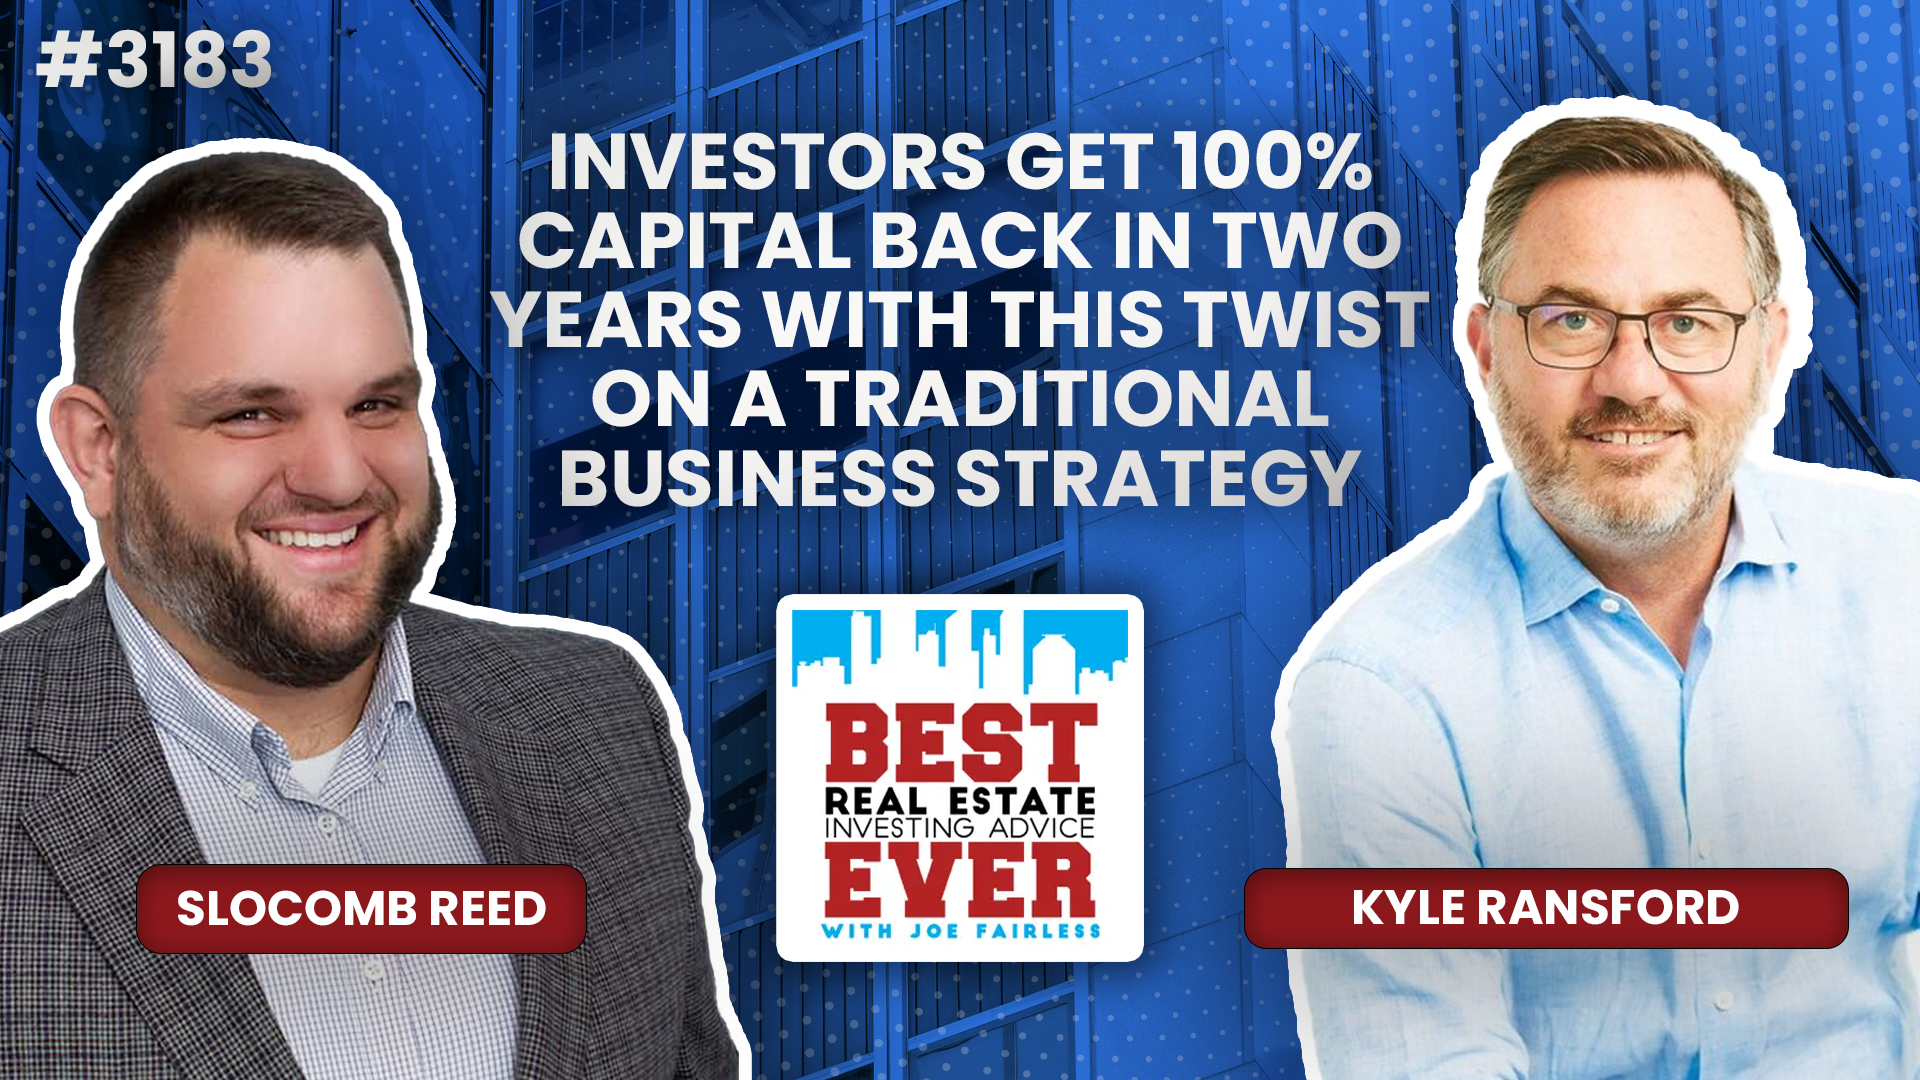 JF3183: Investors Get 100% Capital Back in Two Years With This Twist on a Traditional Business Strategy ft. Kyle Ransford